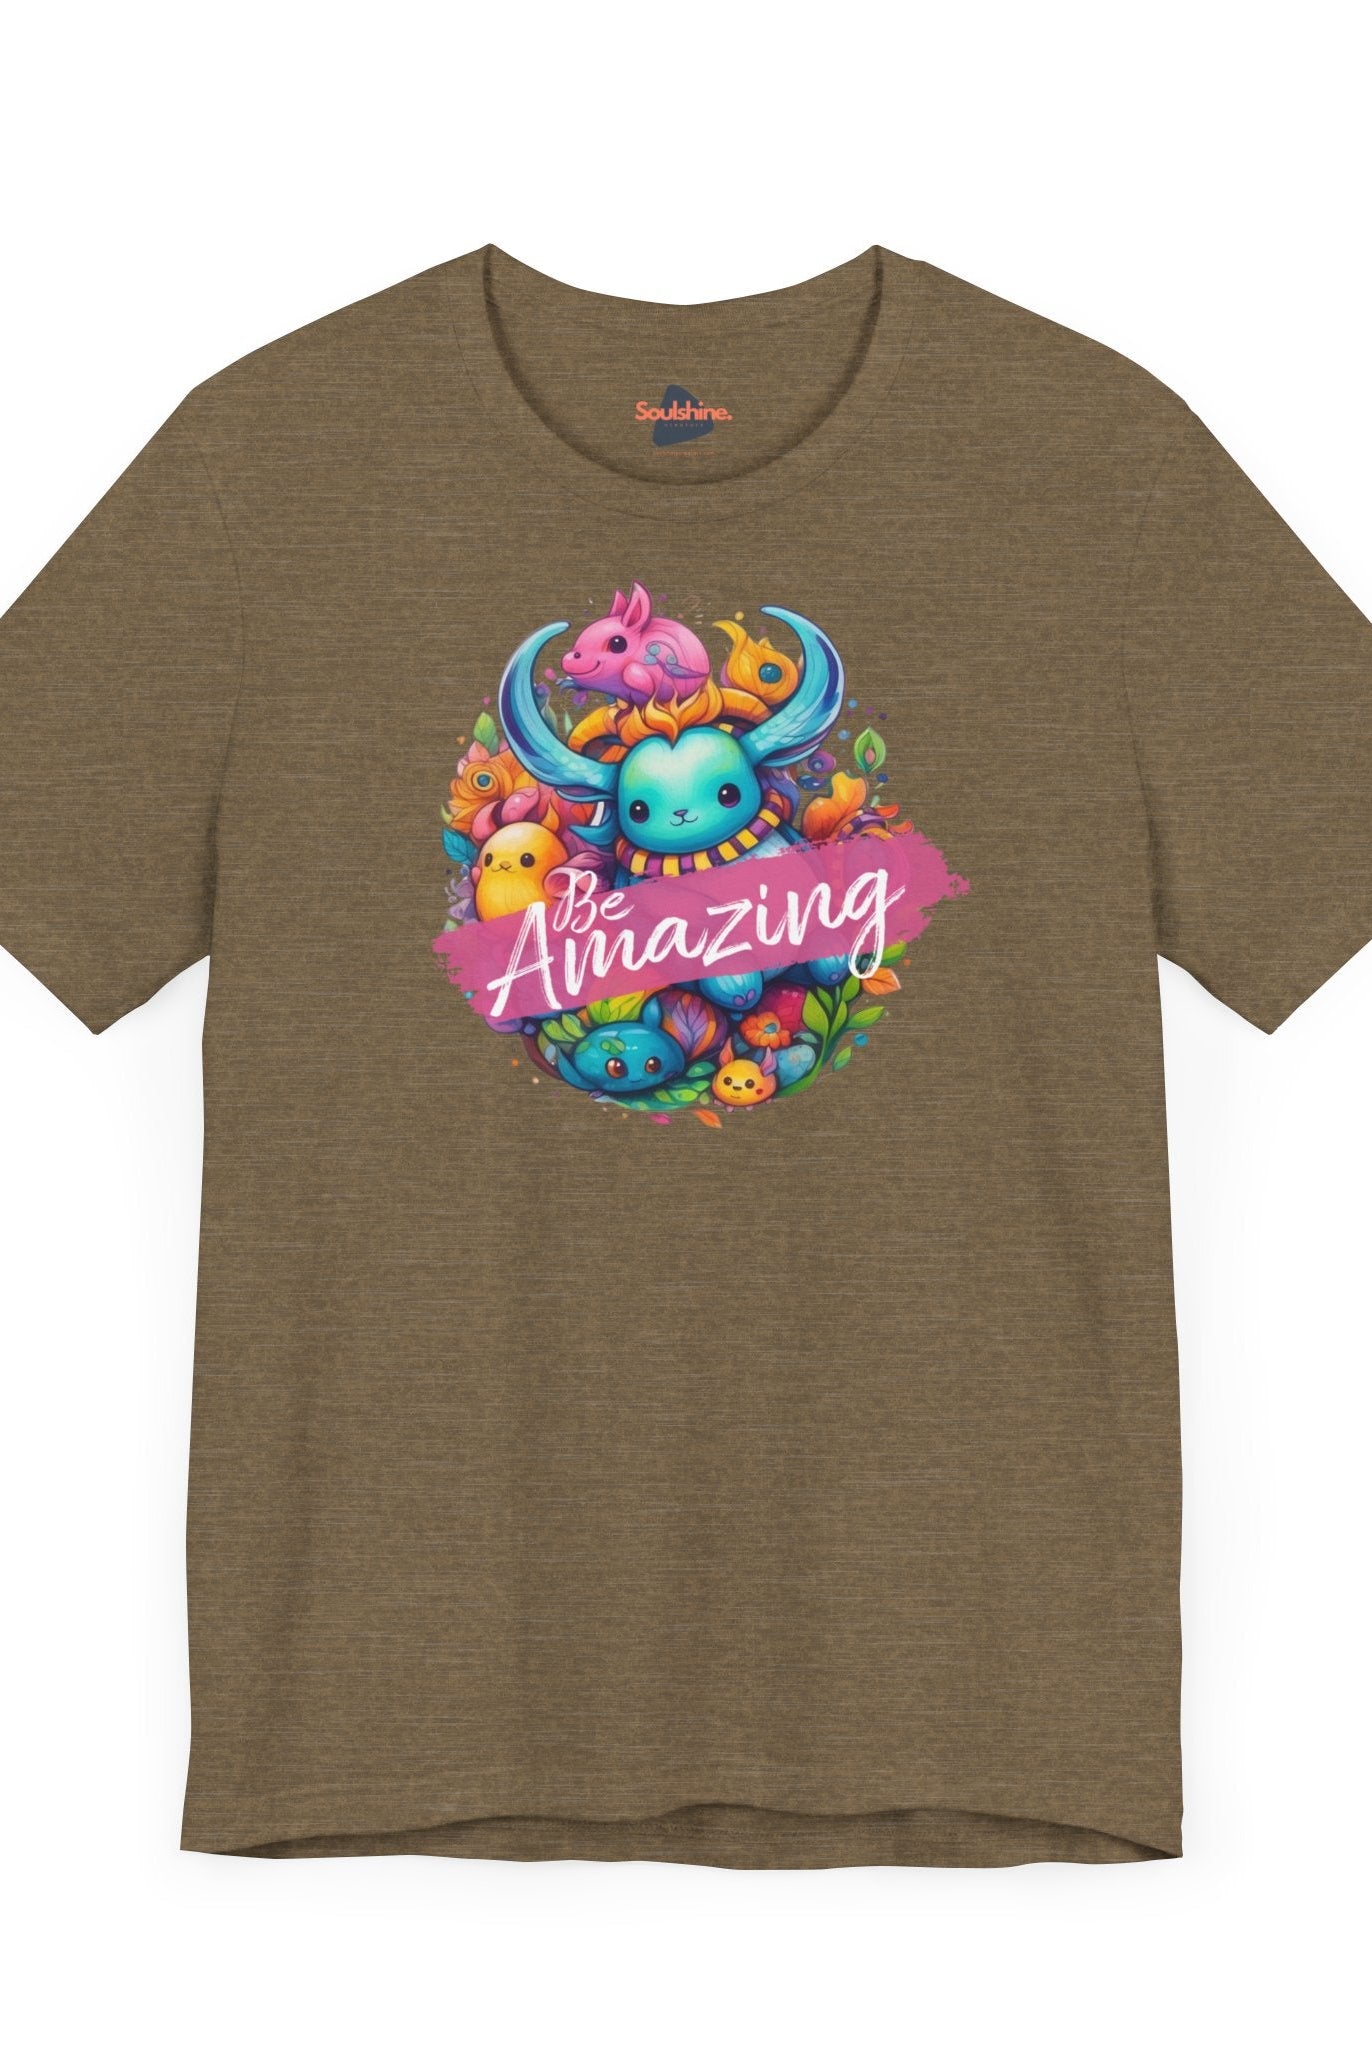 Be Amazing direct-to-garment printed brown unisex t-shirt with bull and flower design by Soulshinecreators